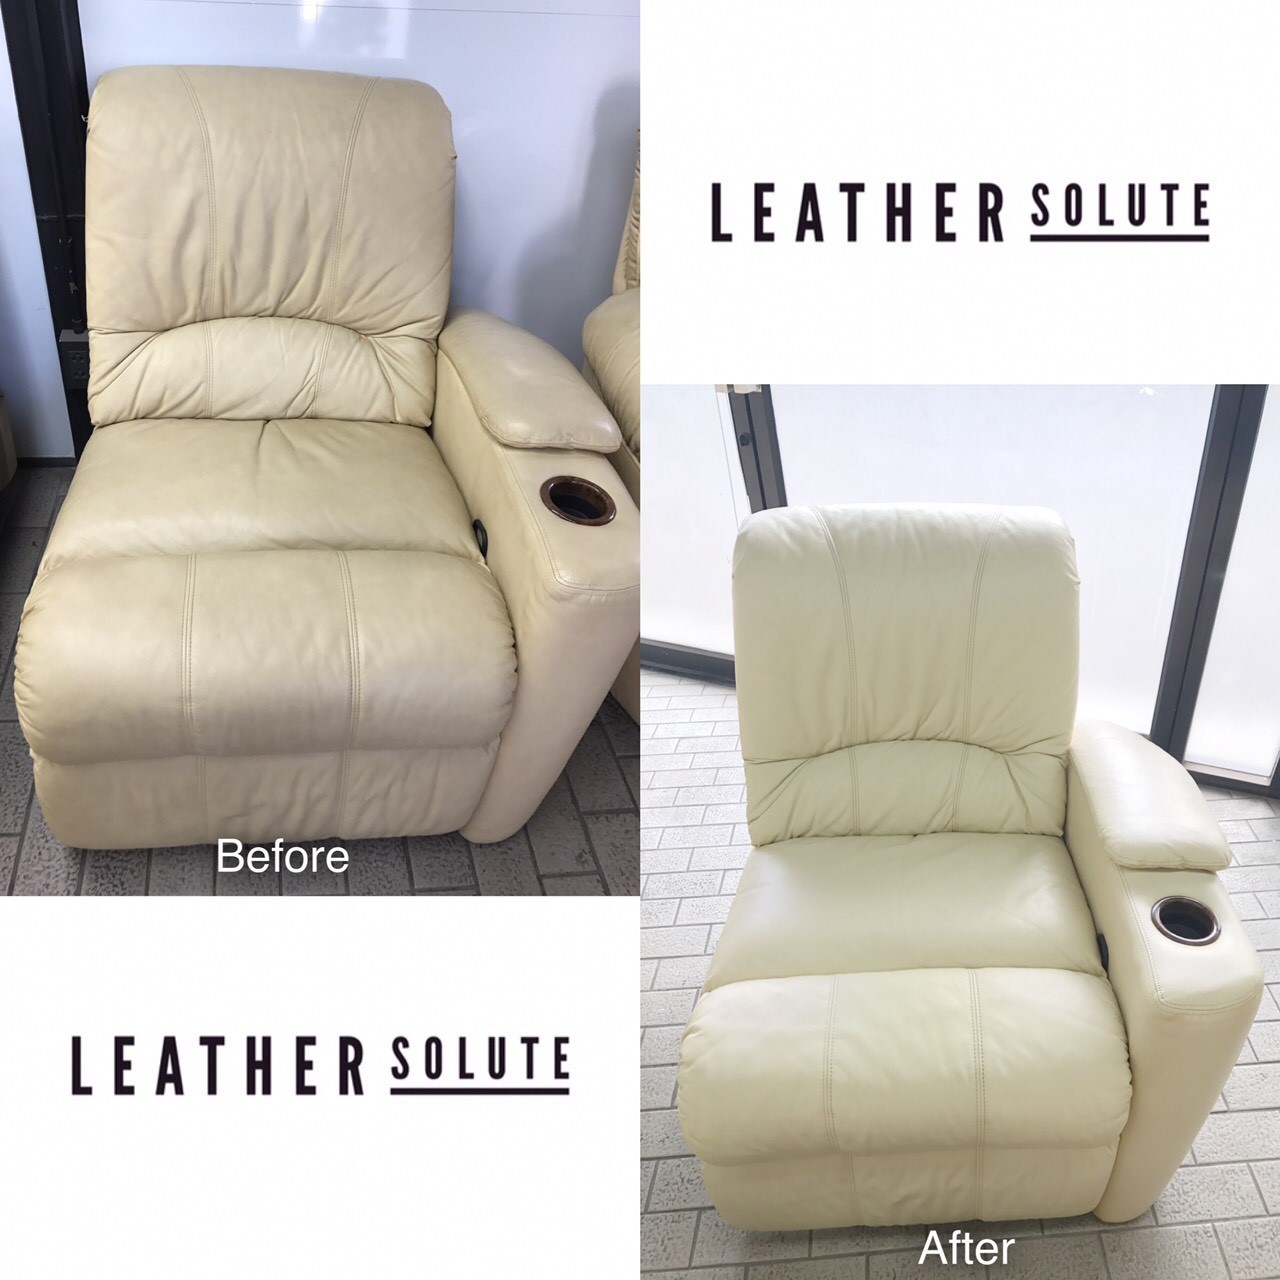 //leathersolute.co.th/wp-content/uploads/2018/12/Cleaning-furniture_๑๘๑๒๓๐_0010.jpg